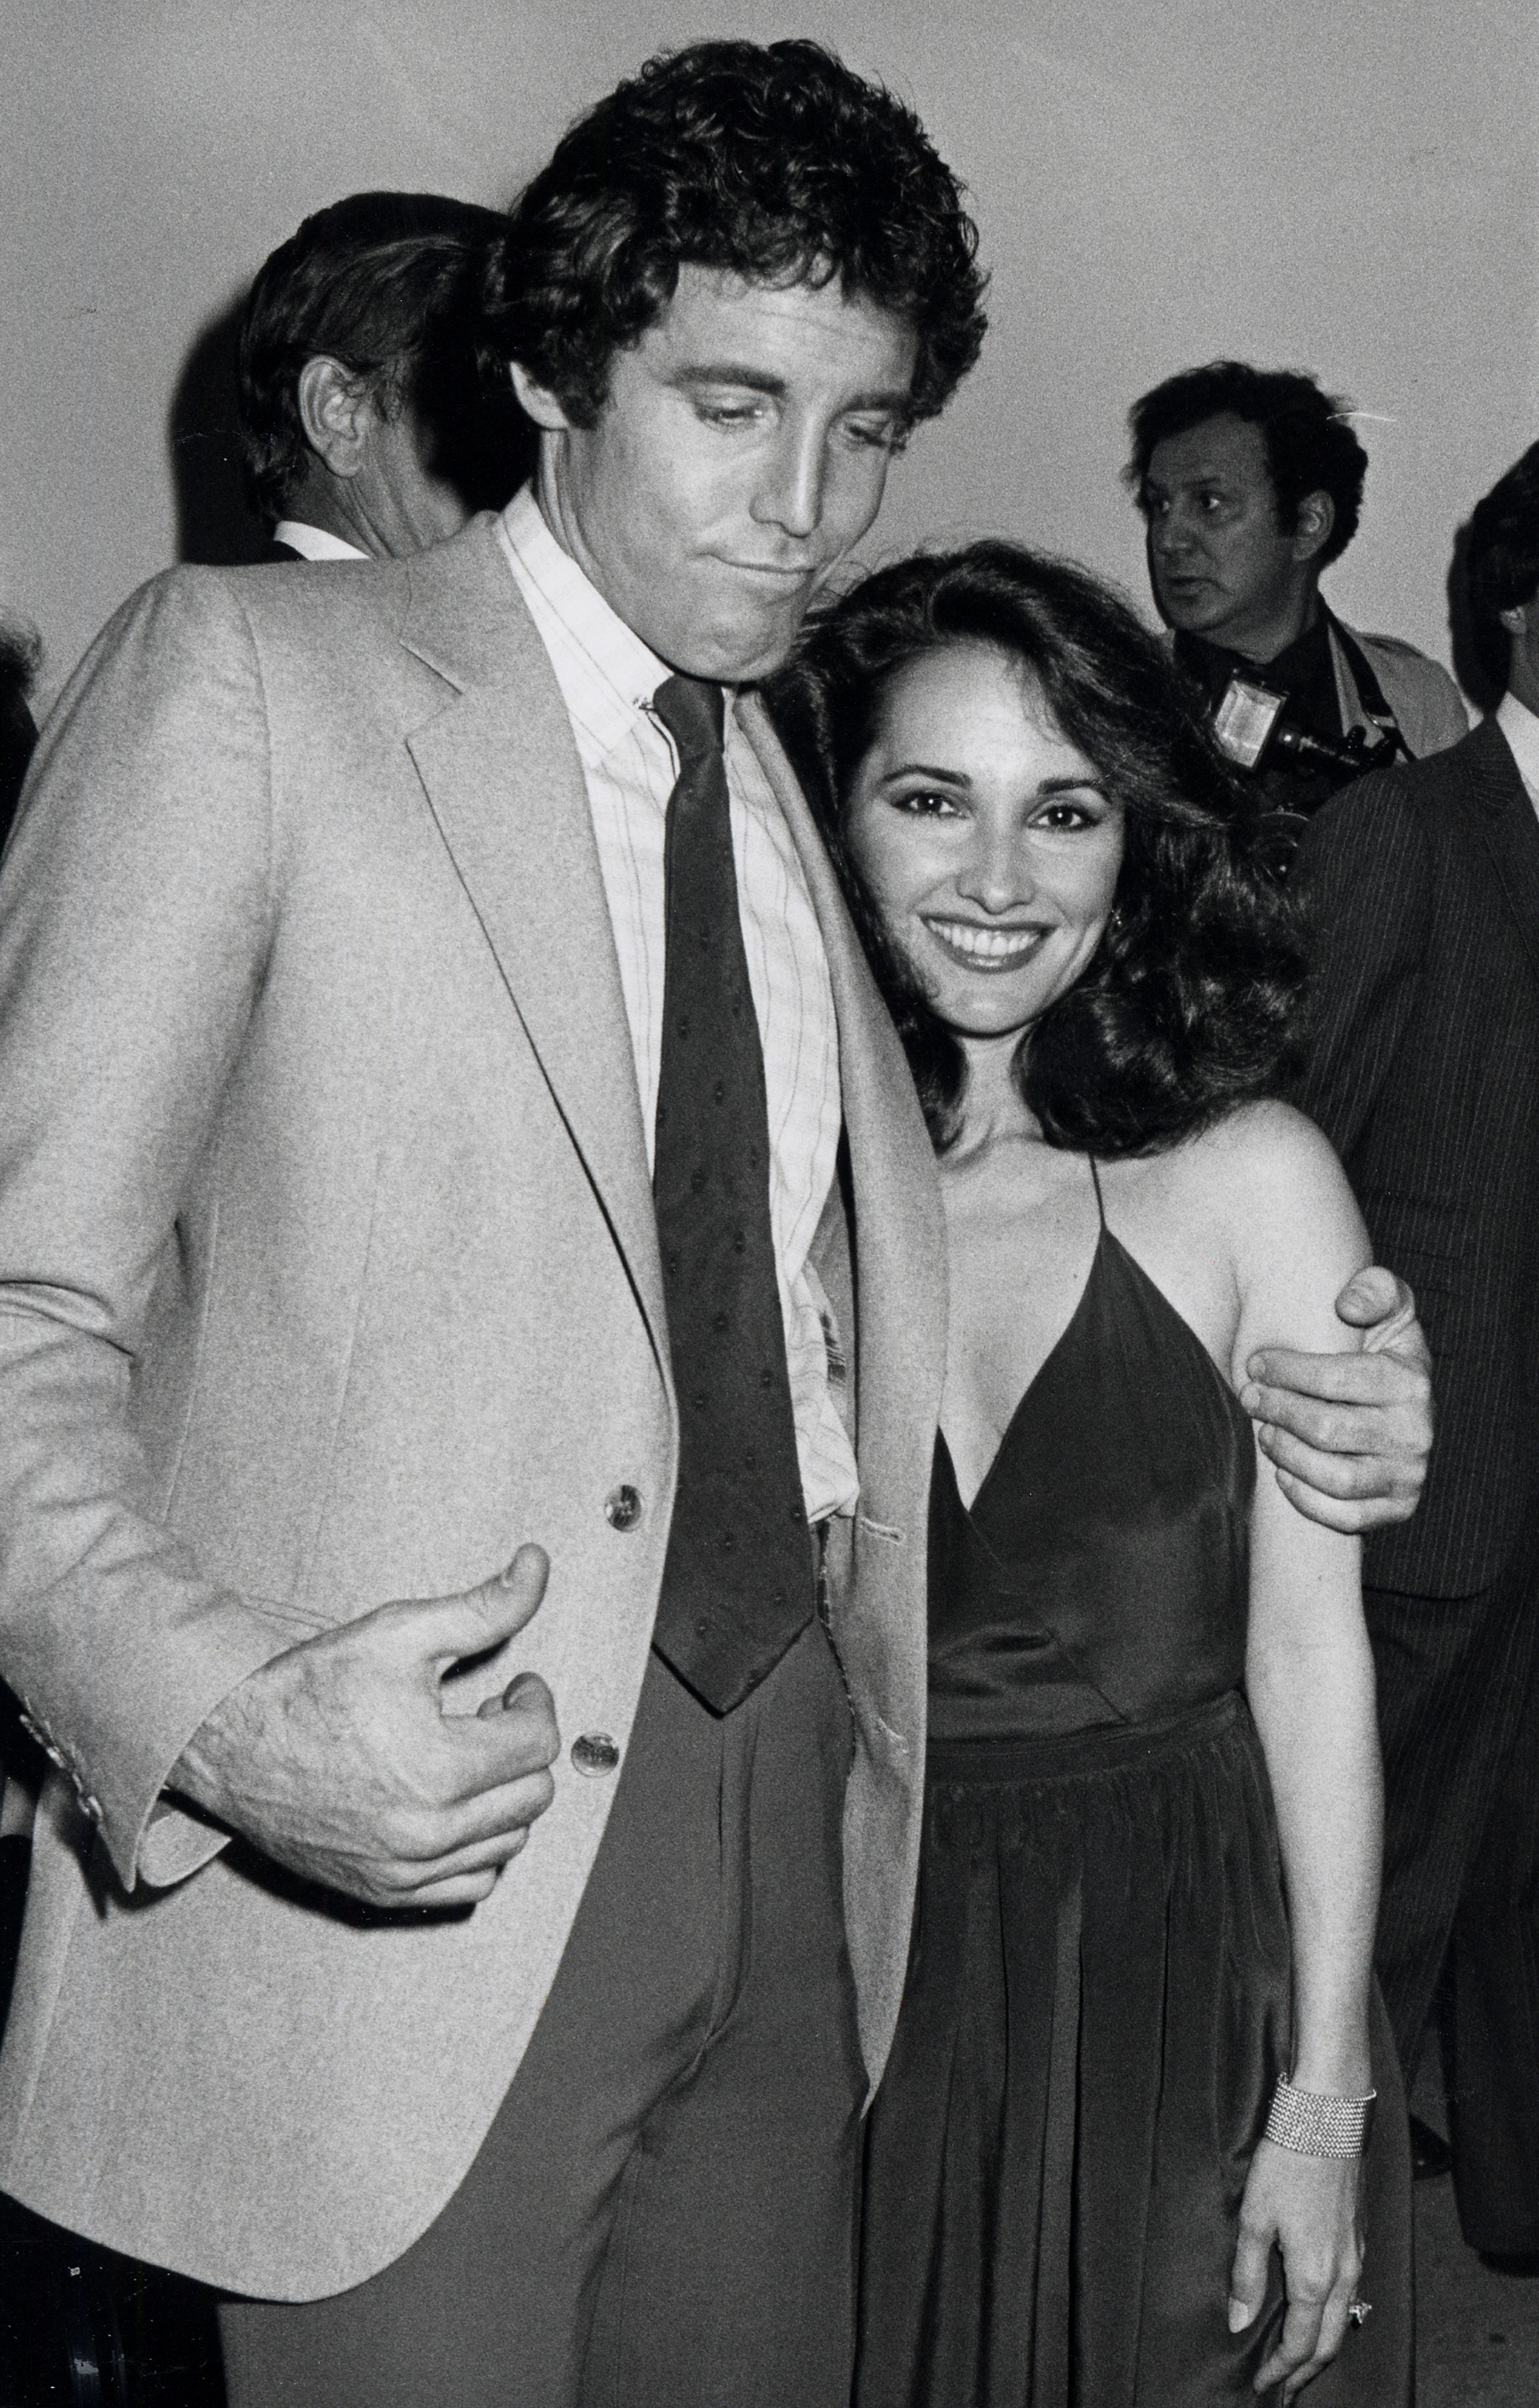 Nick Benedict and Susan Lucci at the 7th Annual Daytime Emmy Awards in 1980 | Source: Getty Images